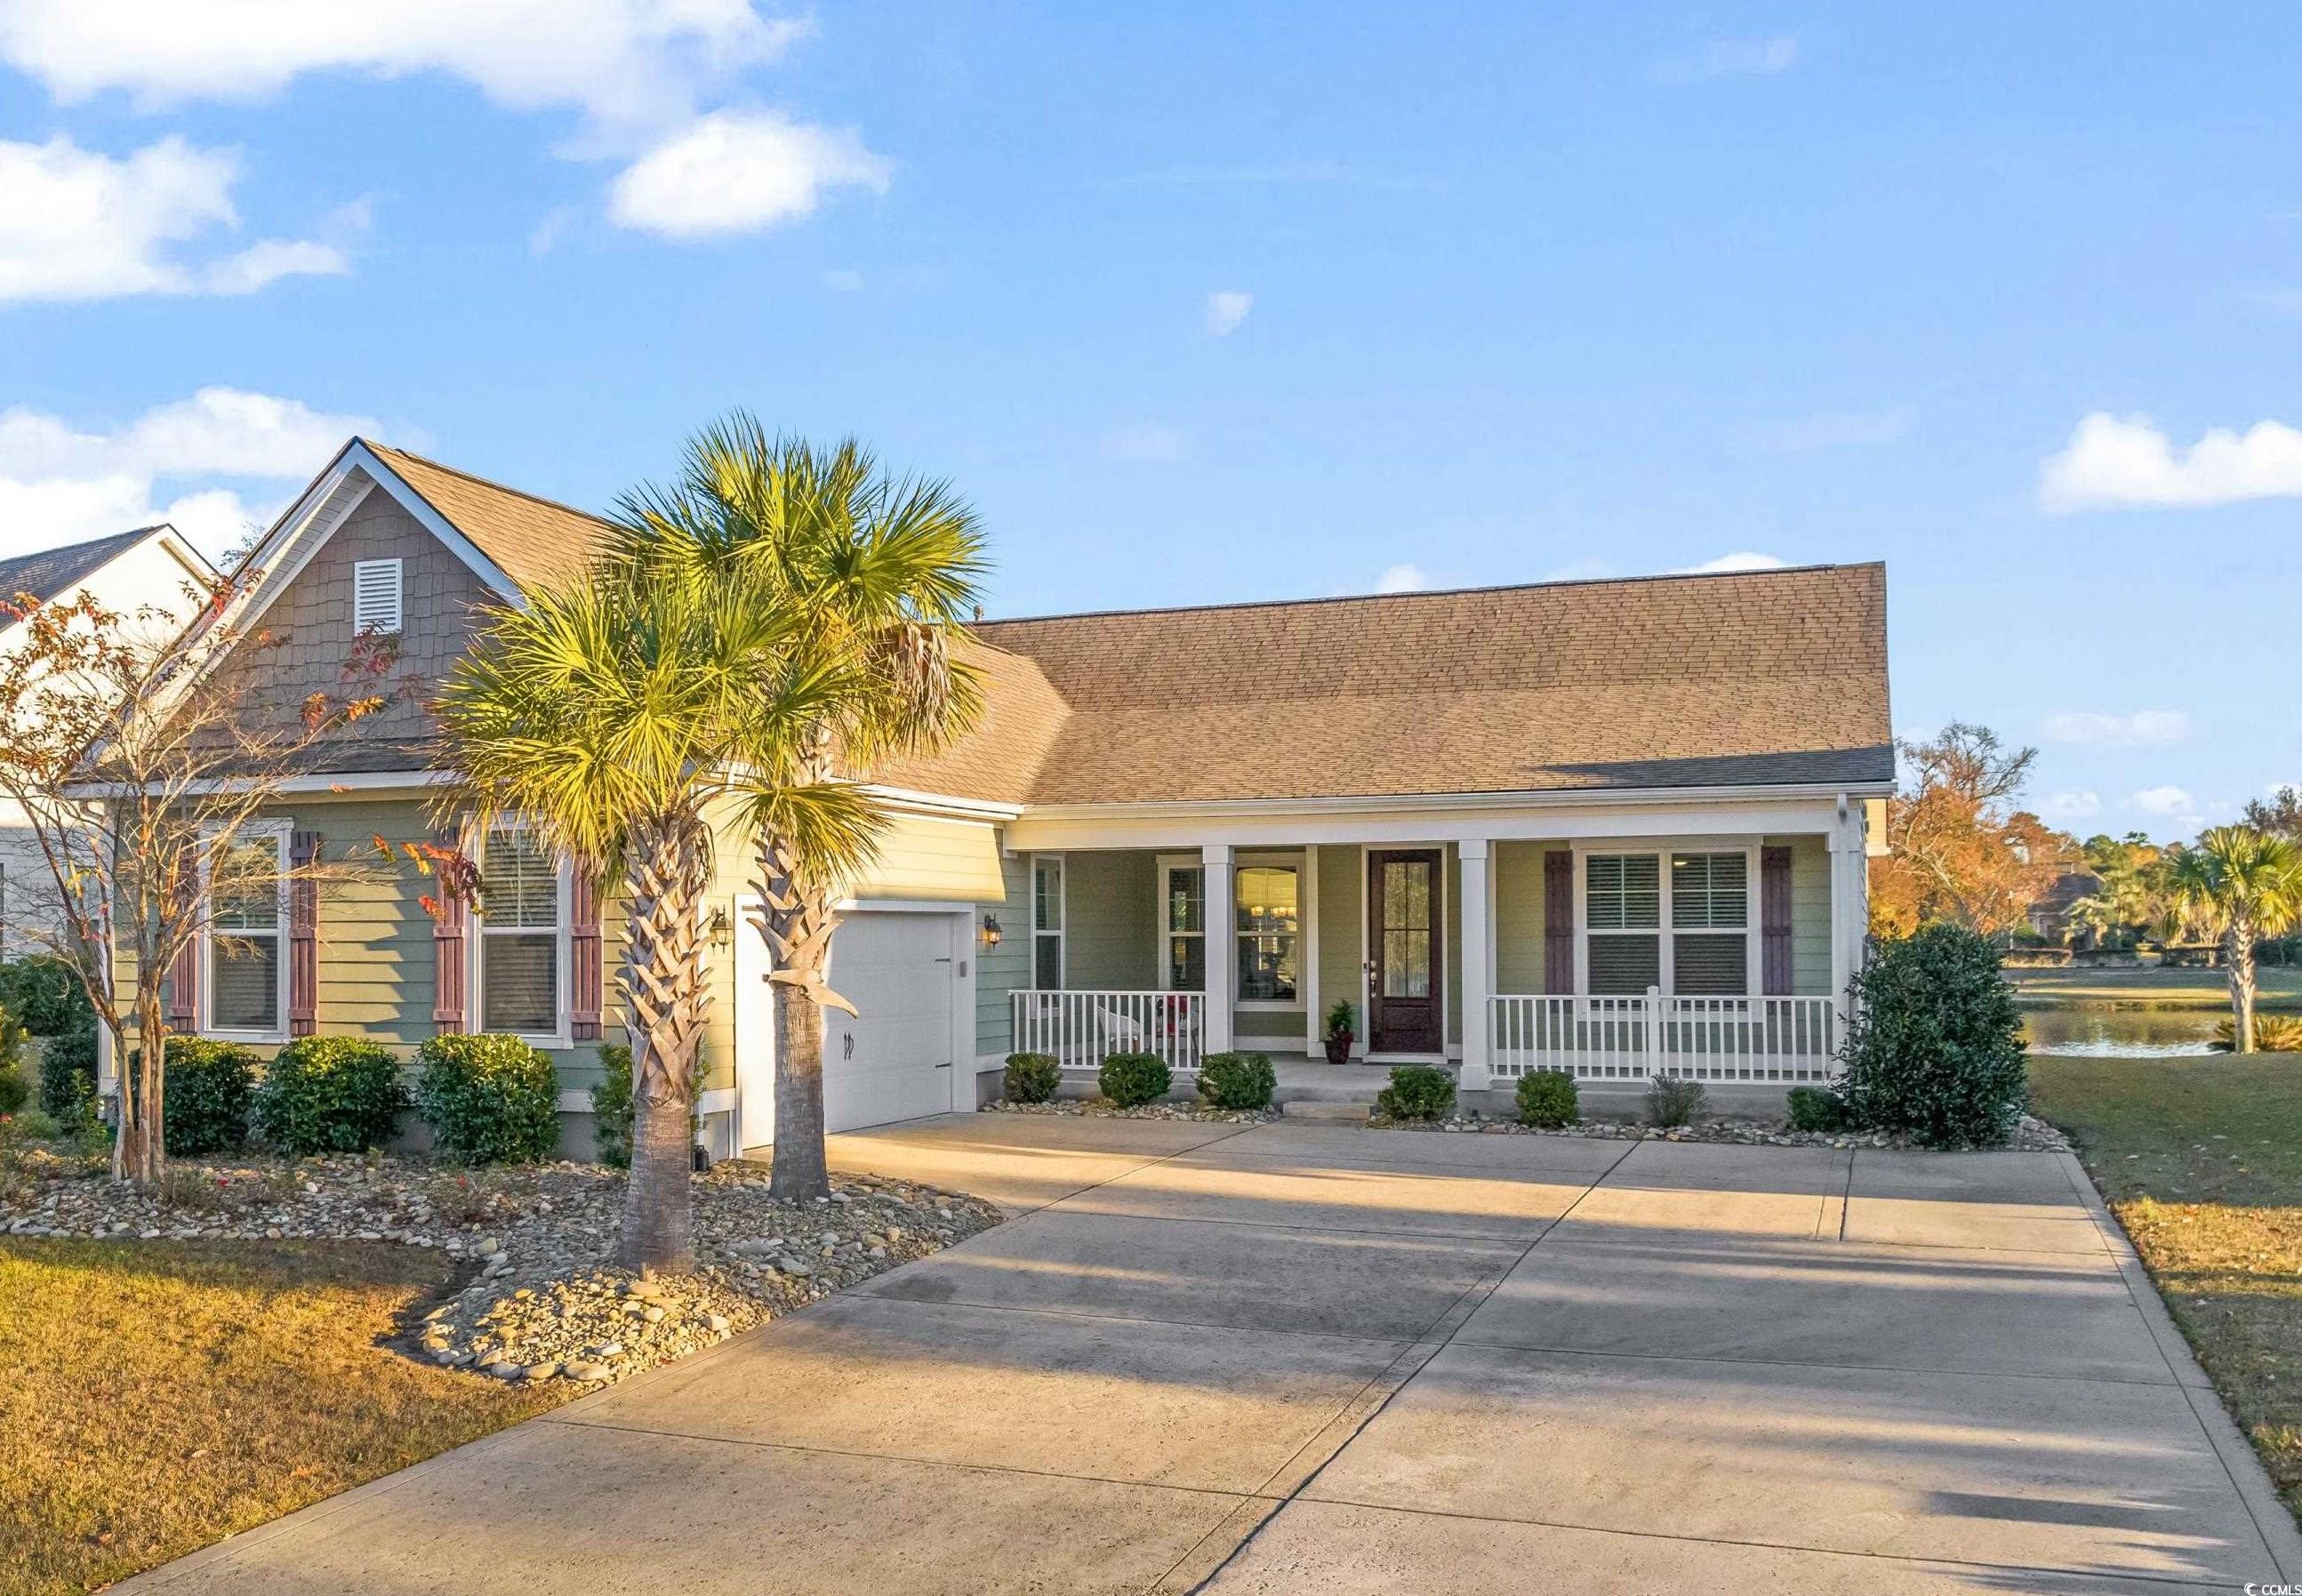 This is one not to be missed!!  Welcome to Seabrook Plantation, a gated, natural gas community. This home features 3 bedrooms, 2.5 bathrooms,  office and a 2 car garage all in a one story setting.  This East of 17 community will entertain you with holiday golf cart parades, seasonal functions, card games, garage sales, fund raisers, book club and more.  The open floor plan between the granite eat in kitchen, formal dining room and living room with vaulted ceilings make it perfect for large gatherings. The living room has 12 foot wide sliders leading to a generous sized screen room which exits to a patio of stone pavers.  This house is meticulously maintained with wood style tile floors through out the entire home.  The views from the front porch and the back yard are those that can not be matched.  Enjoy the sunset out front on your covered porch with a water/fountain view or relax by the stone fire pit overlooking water/fountain surrounded by custom stone retaining wall.   One of the most private settings in the community.  Home has natural gas tankless hot water heater and gas heat. This community is a golf cart ride to almost anywhere you need to go including Cherry Grove beach, Publix, Hobby Lobby numerous golf courses and restaurants.  Community has RV/boat storage, club house, pool and hot tub.